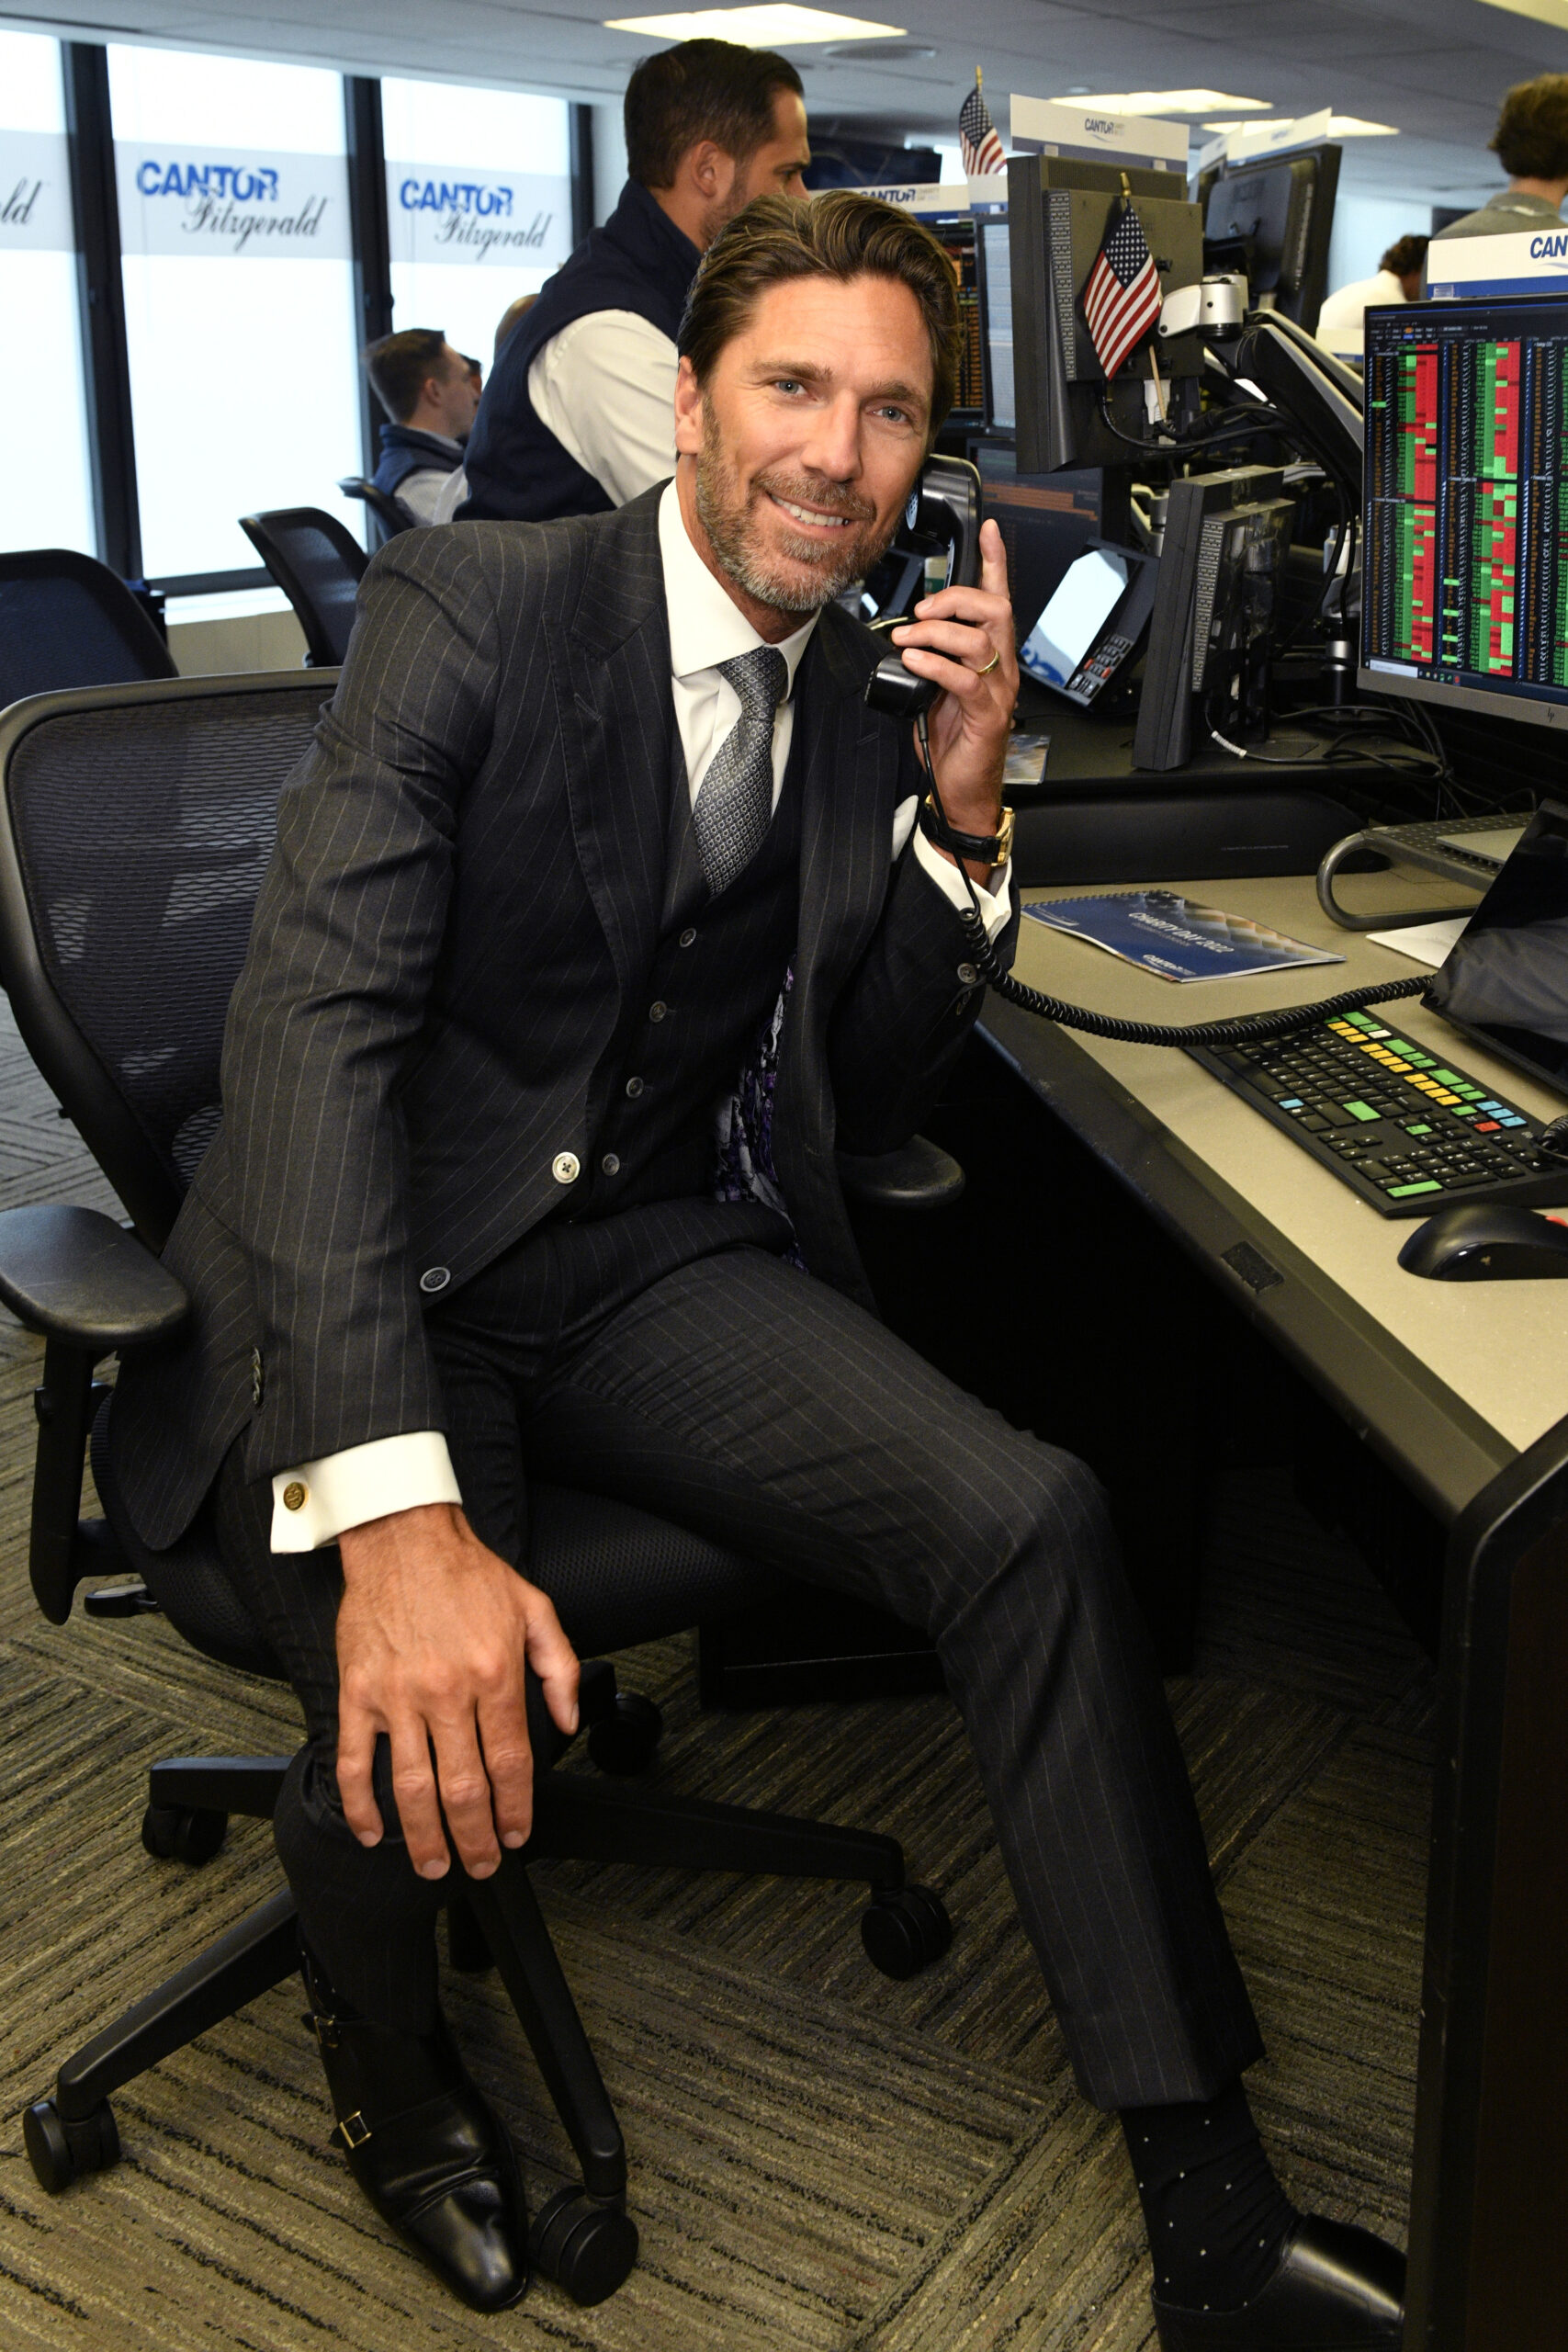 NEW YORK, NEW YORK - SEPTEMBER 12: Henrik Lundqvist attends the annual charity day hosted by Cantor Fitzgerald and The Cantor Fitzgerald Relief Fund on September 12, 2022 in New York City. (Photo by Eugene Gologursky/Getty Images for Cantor Fitzgerald)